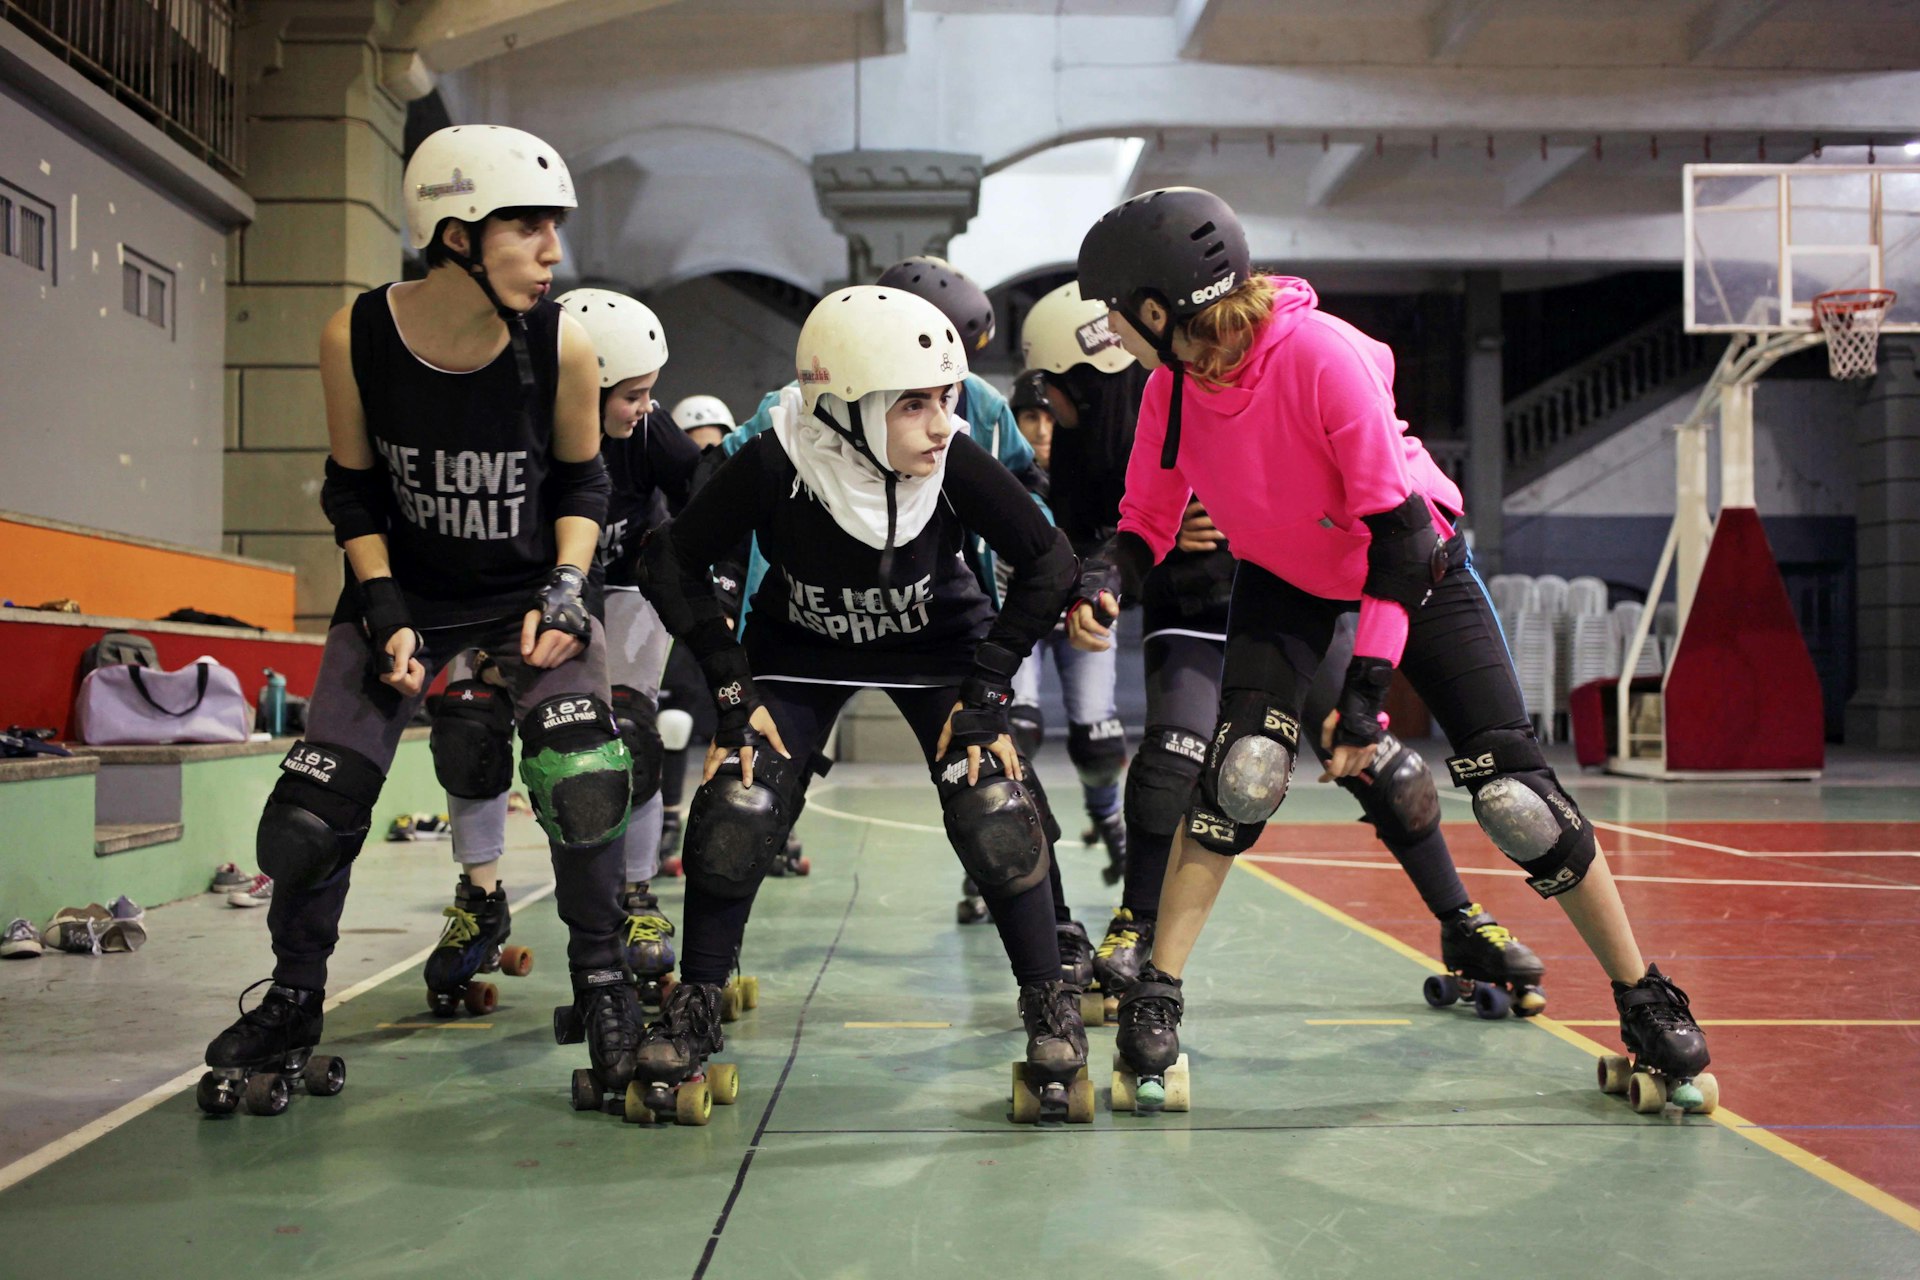 The fierce pioneers of Lebanon's first female roller derby team